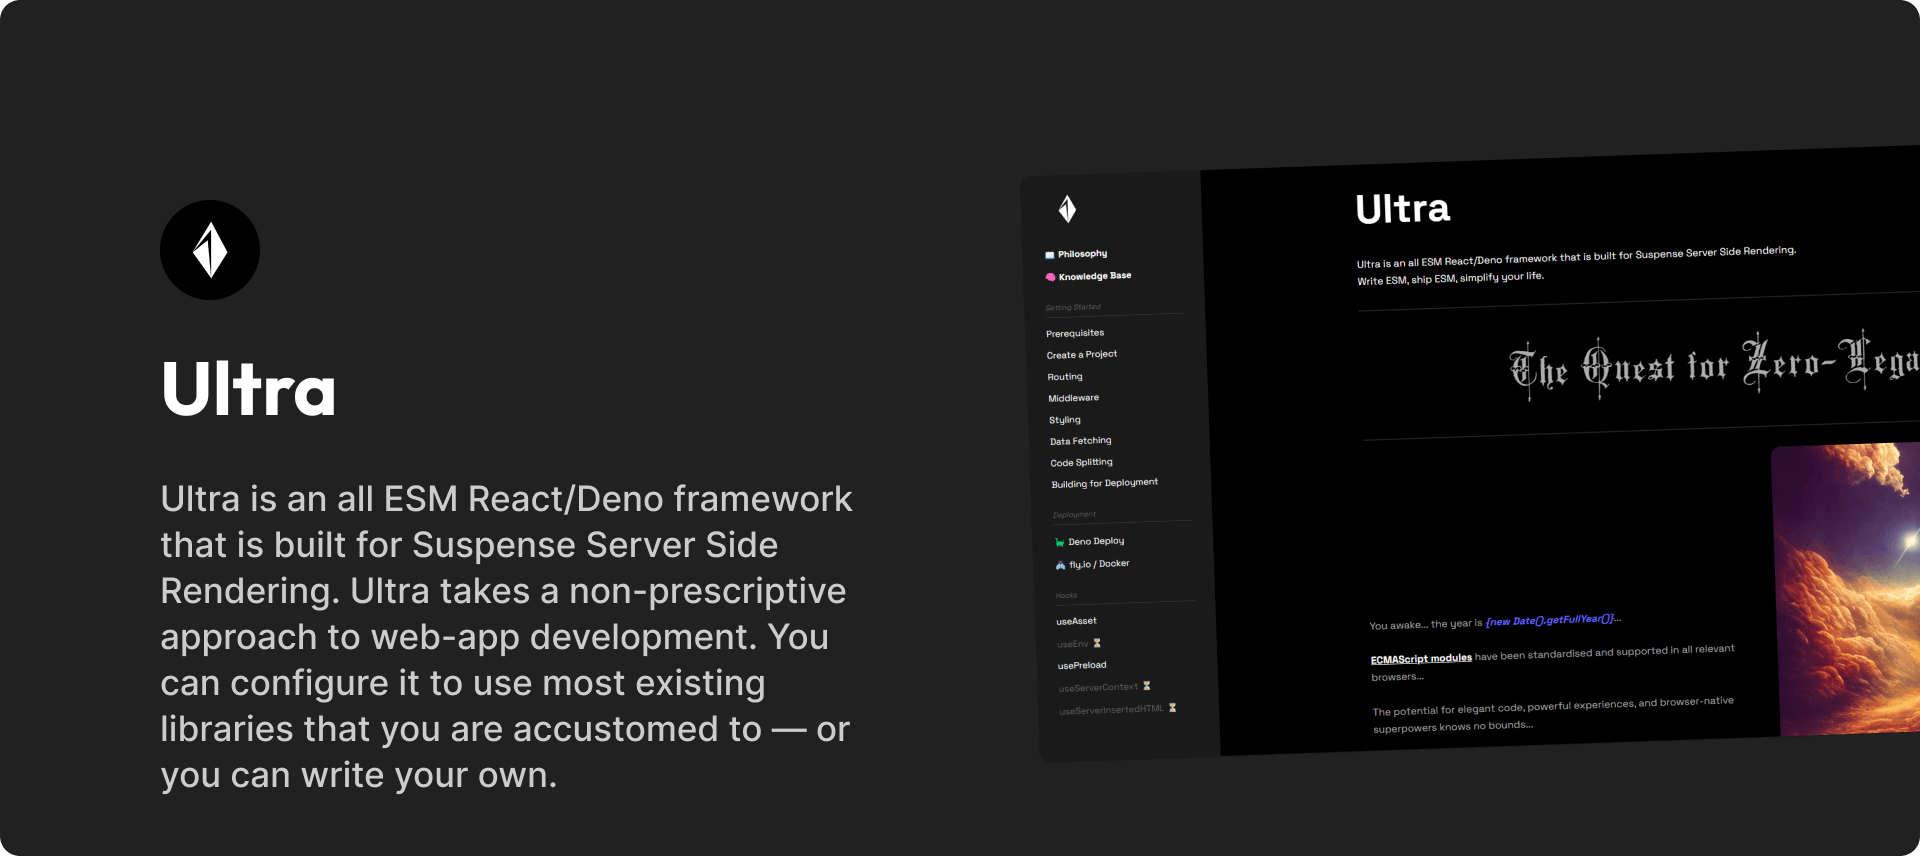 Ultra is an all ESM React/Deno framework that is built for Suspense Server Side Rendering. Ultra takes a non-prescriptive approach to web-app development. You can configure it to use most existing libraries that you are accustomed to — or you can write your own.